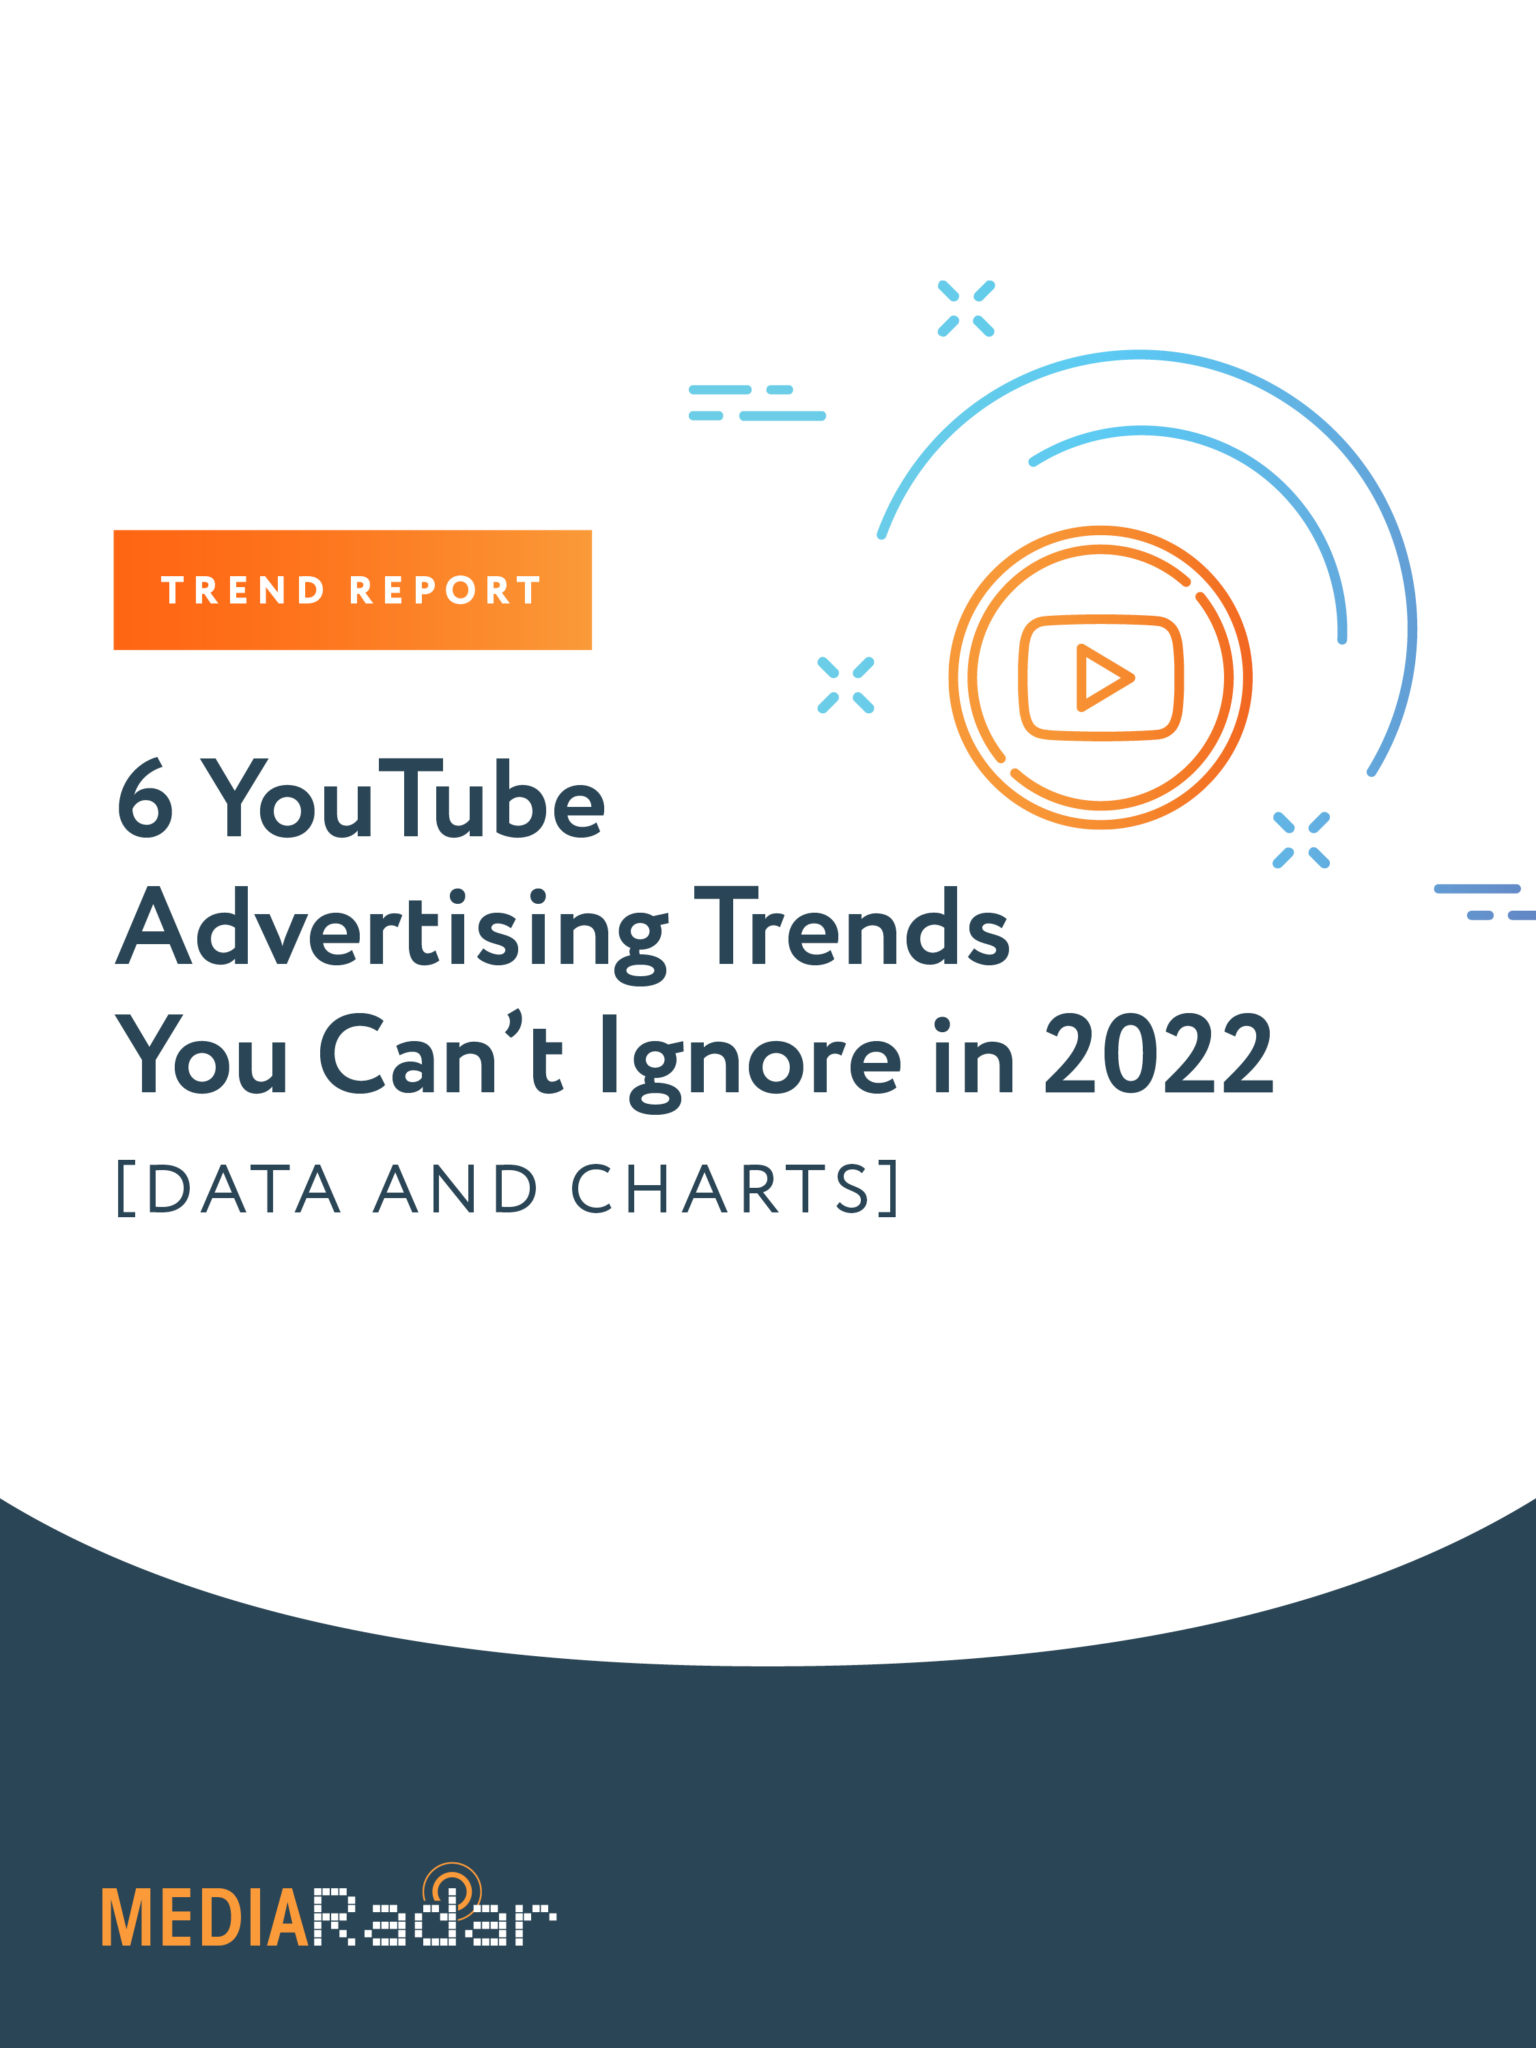 YouTube Trends You Can't Ignore in 2022